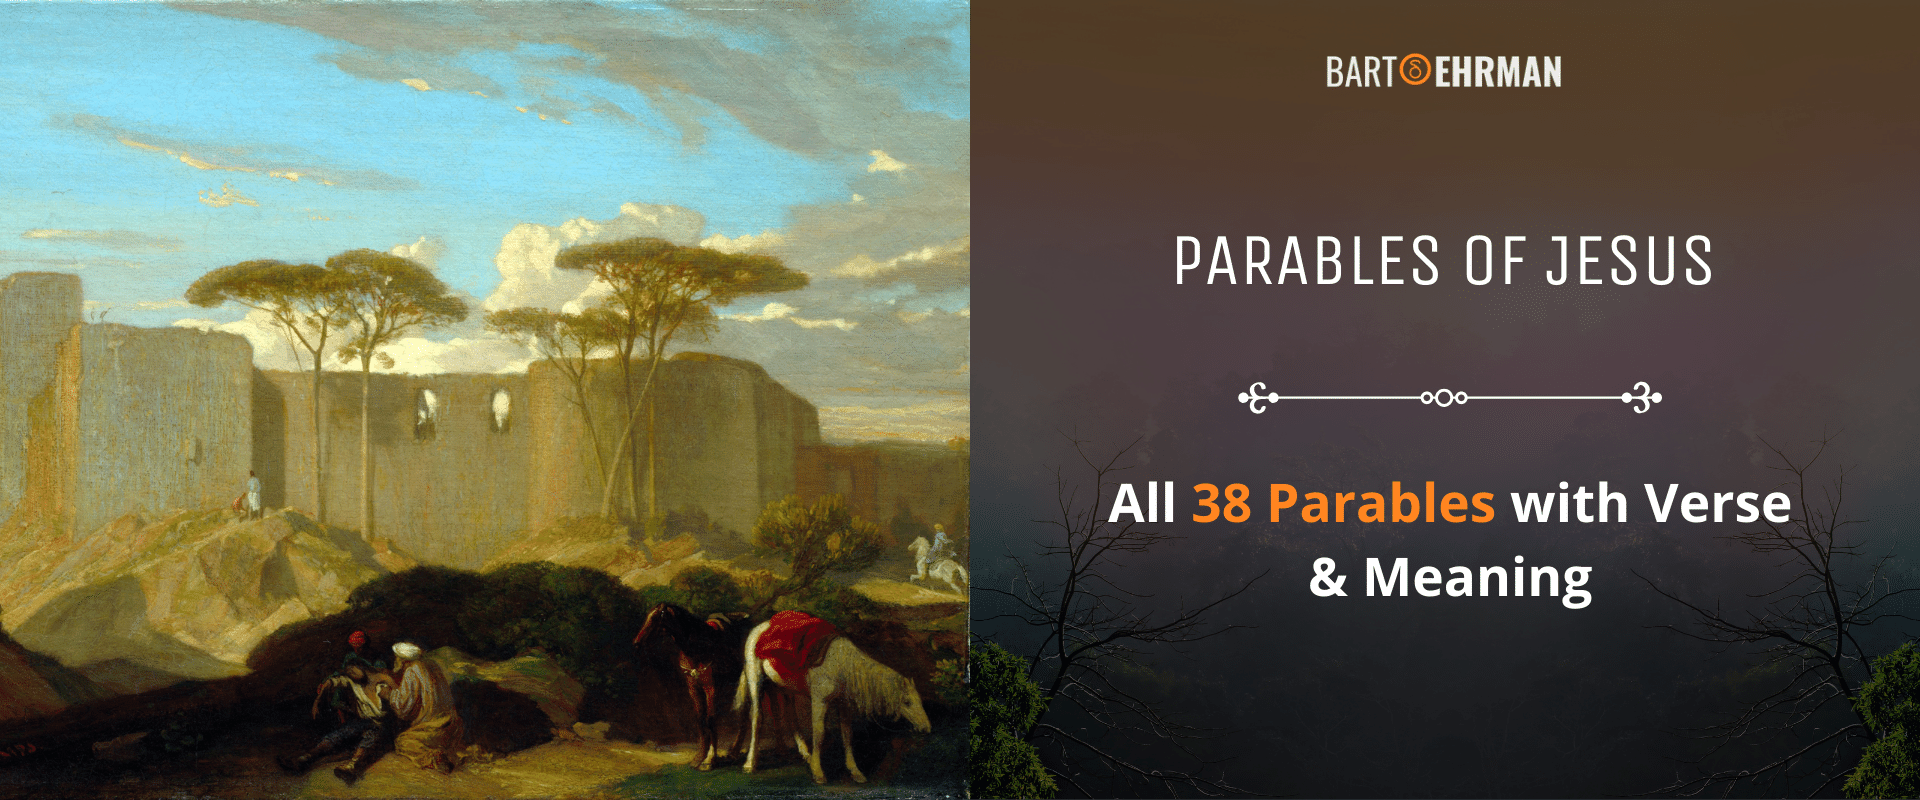 Parables of Jesus - All 38 Parables with Verse & Meaning